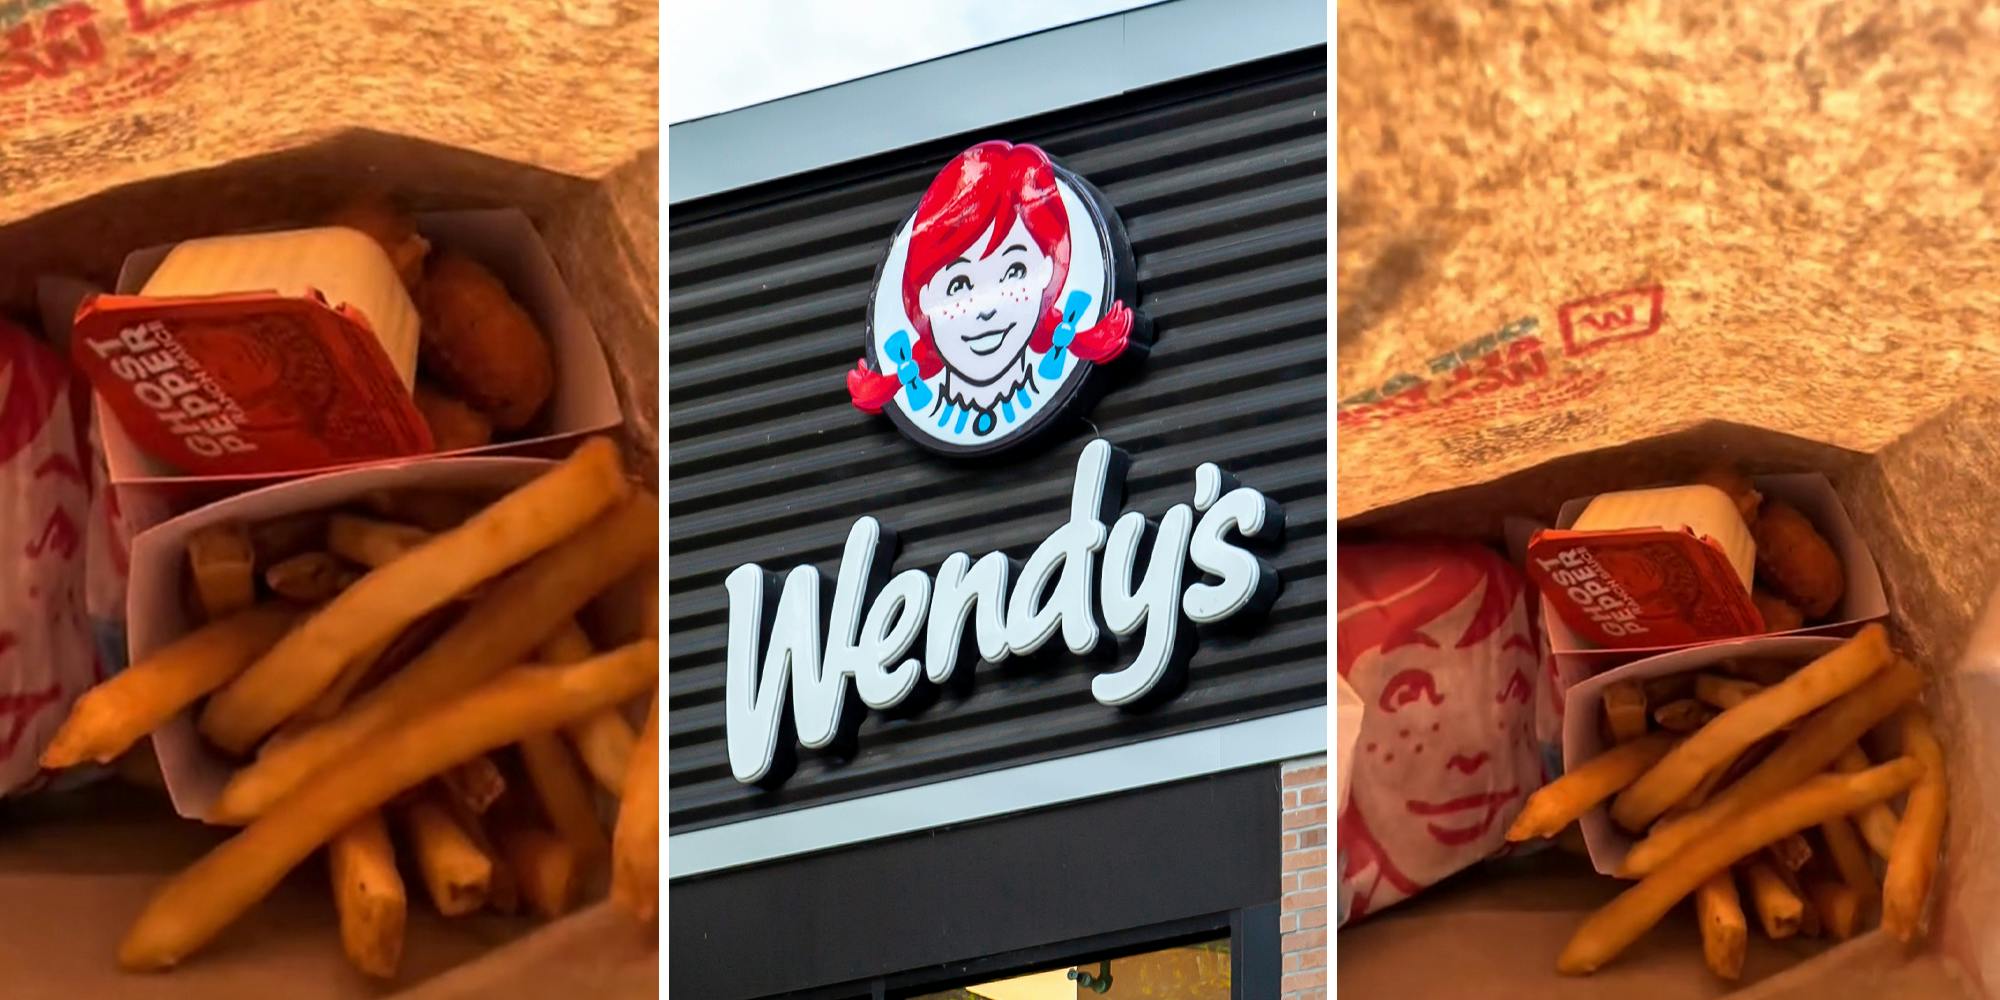 Wendy Customer Calls Out Disgusting Drive - Thru Practice